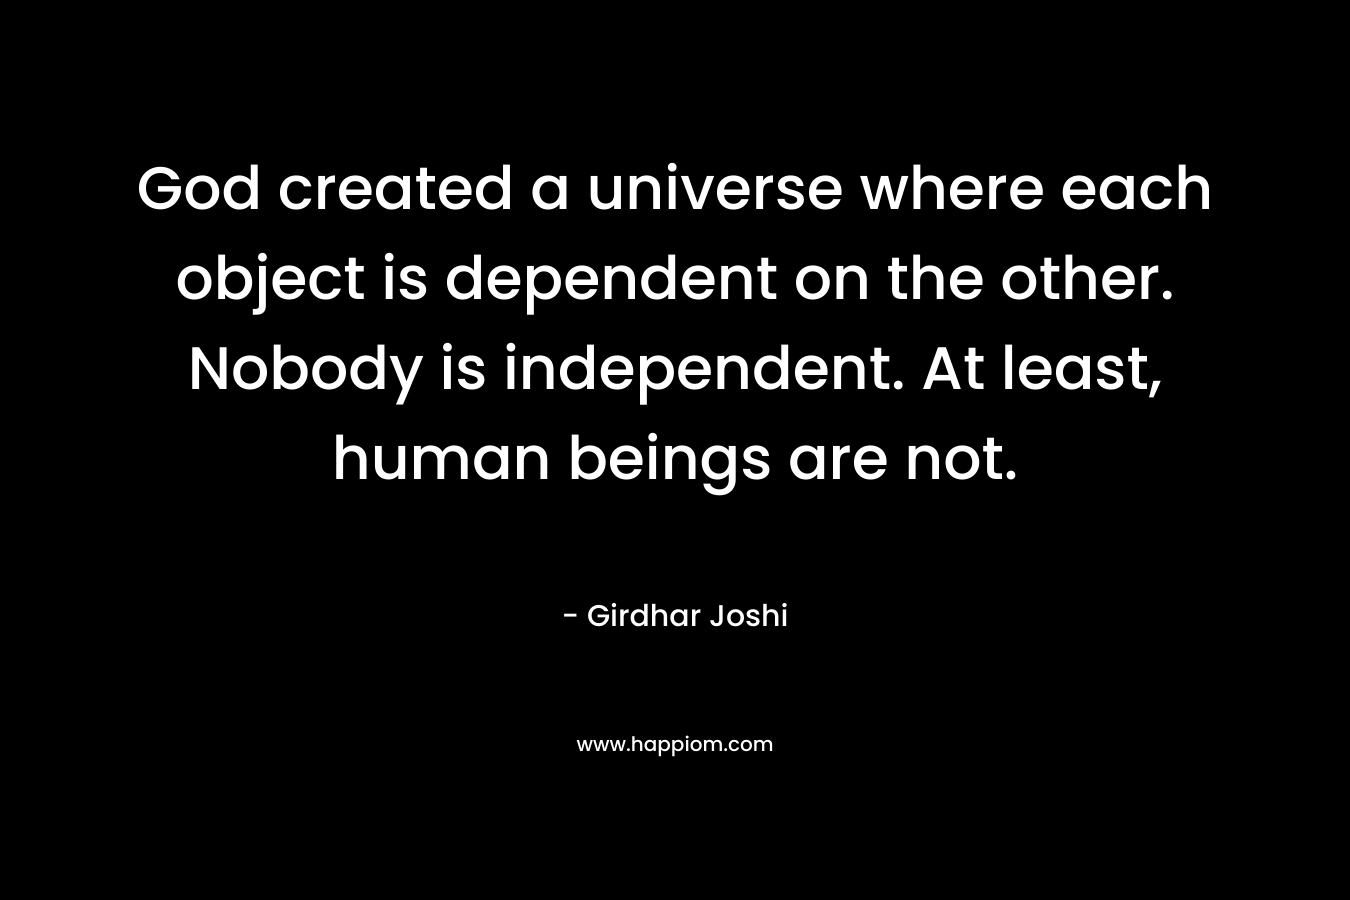 God created a universe where each object is dependent on the other. Nobody is independent. At least, human beings are not.